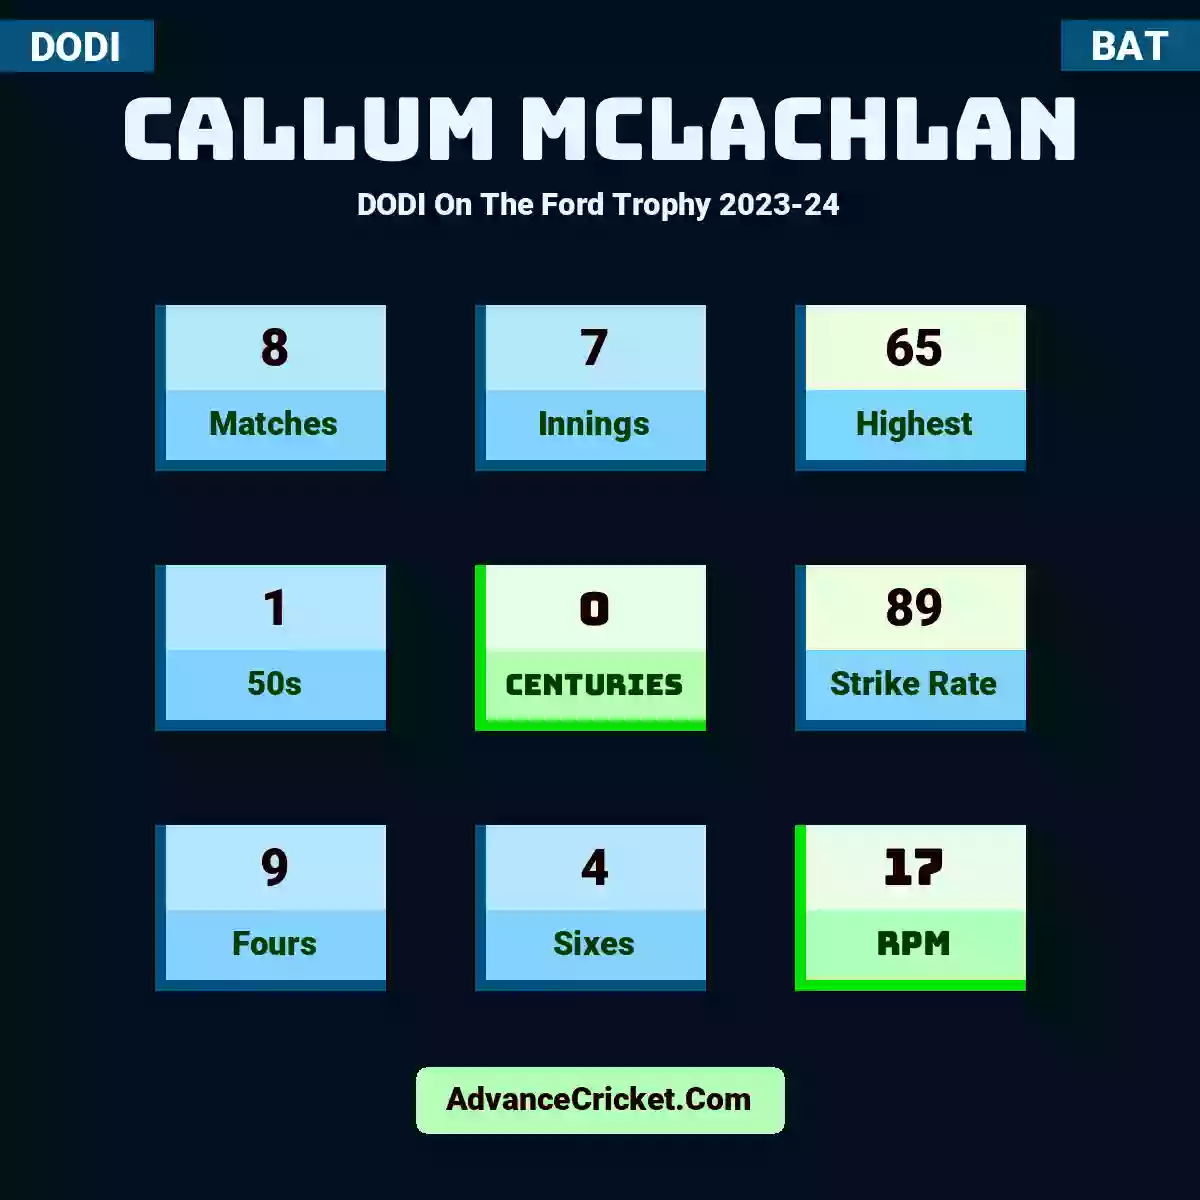 Callum McLachlan DODI  On The Ford Trophy 2023-24, Callum McLachlan played 8 matches, scored 65 runs as highest, 1 half-centuries, and 0 centuries, with a strike rate of 89. C.McLachlan hit 9 fours and 4 sixes, with an RPM of 17.